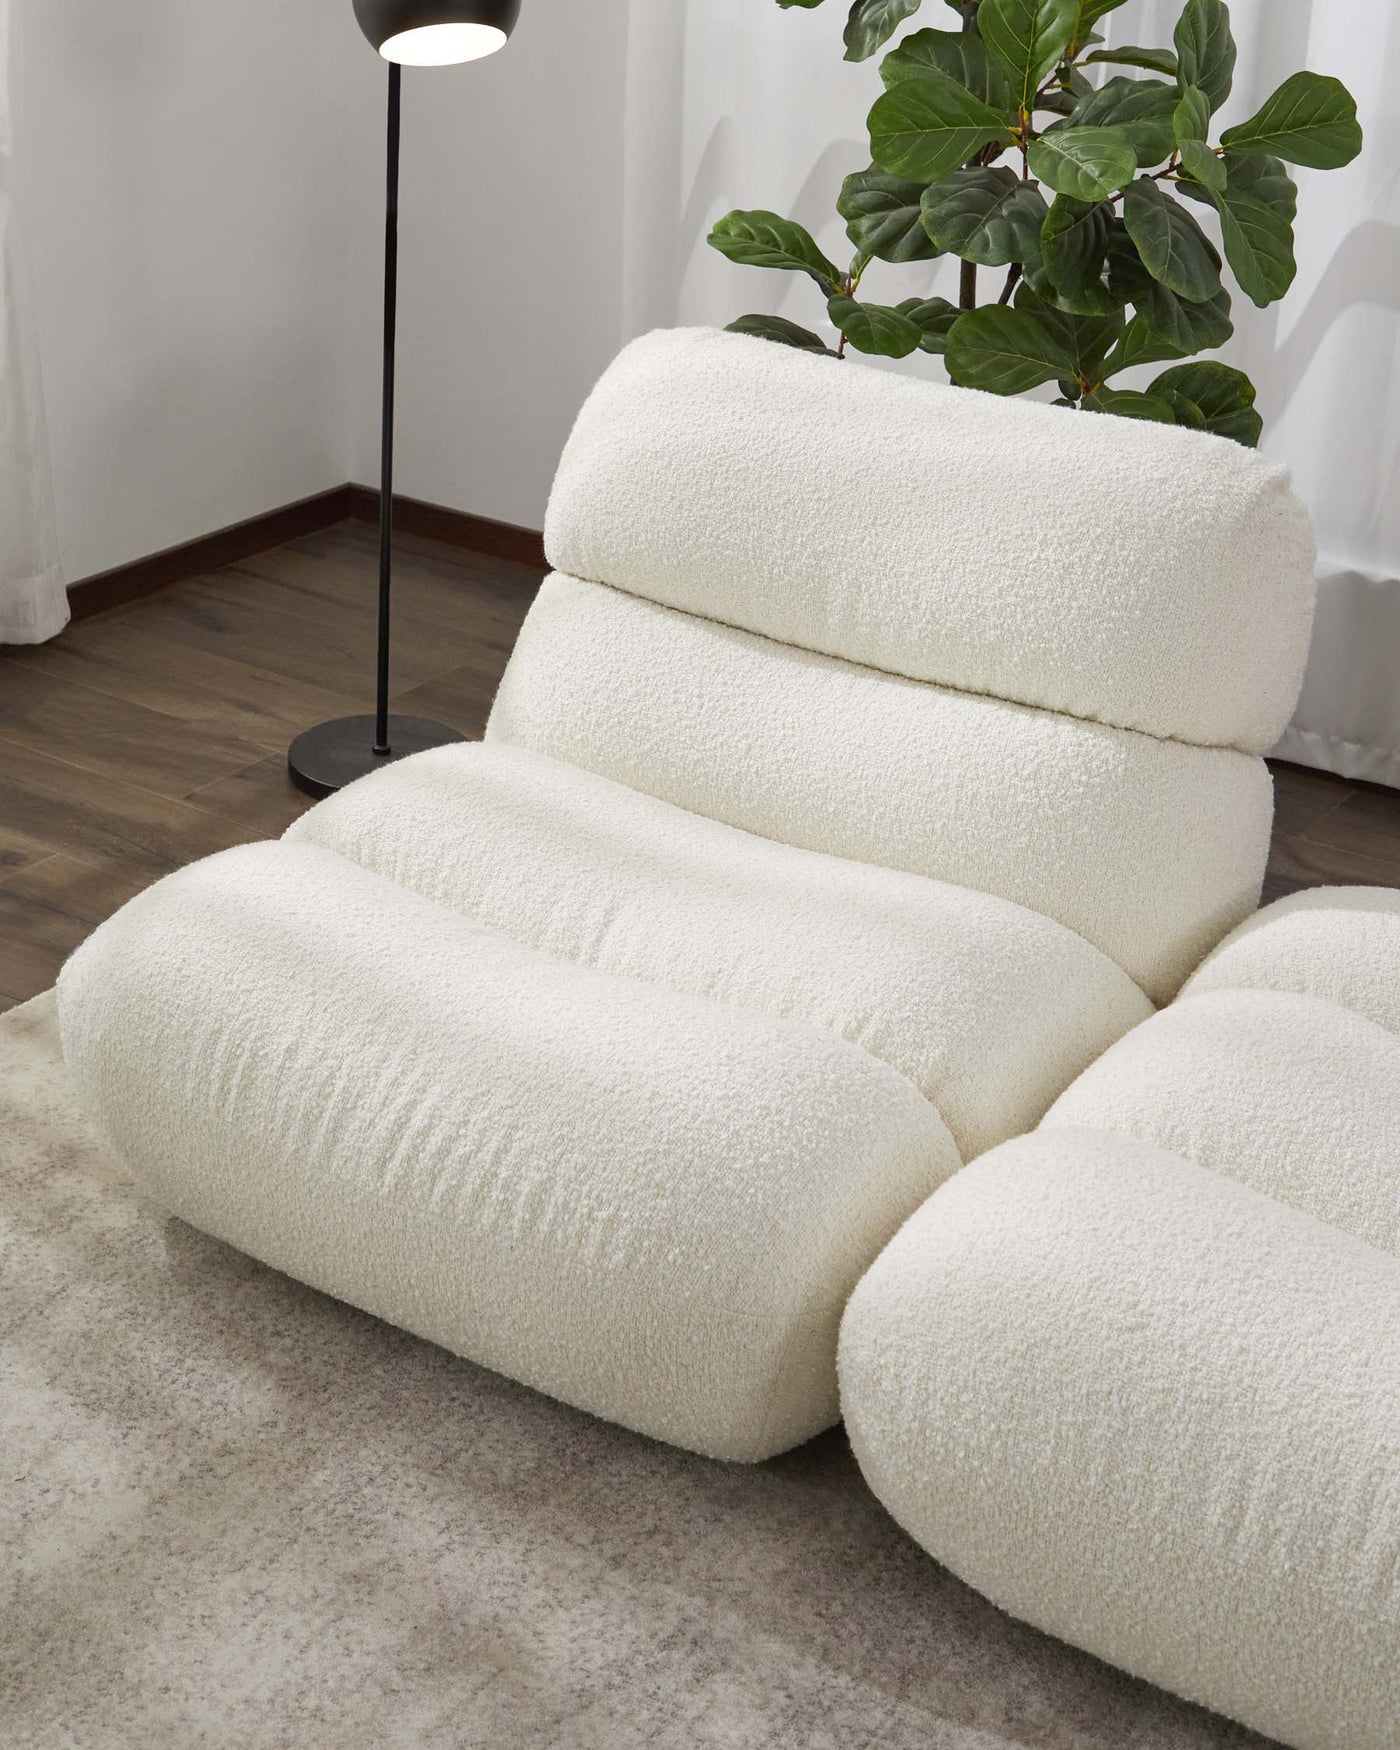 Plush, modern armchair with textured white fabric, featuring a unique contoured design with rounded cushions for the seat, back, and arms, presented in a cosy room setting with wood flooring and neutral decor.